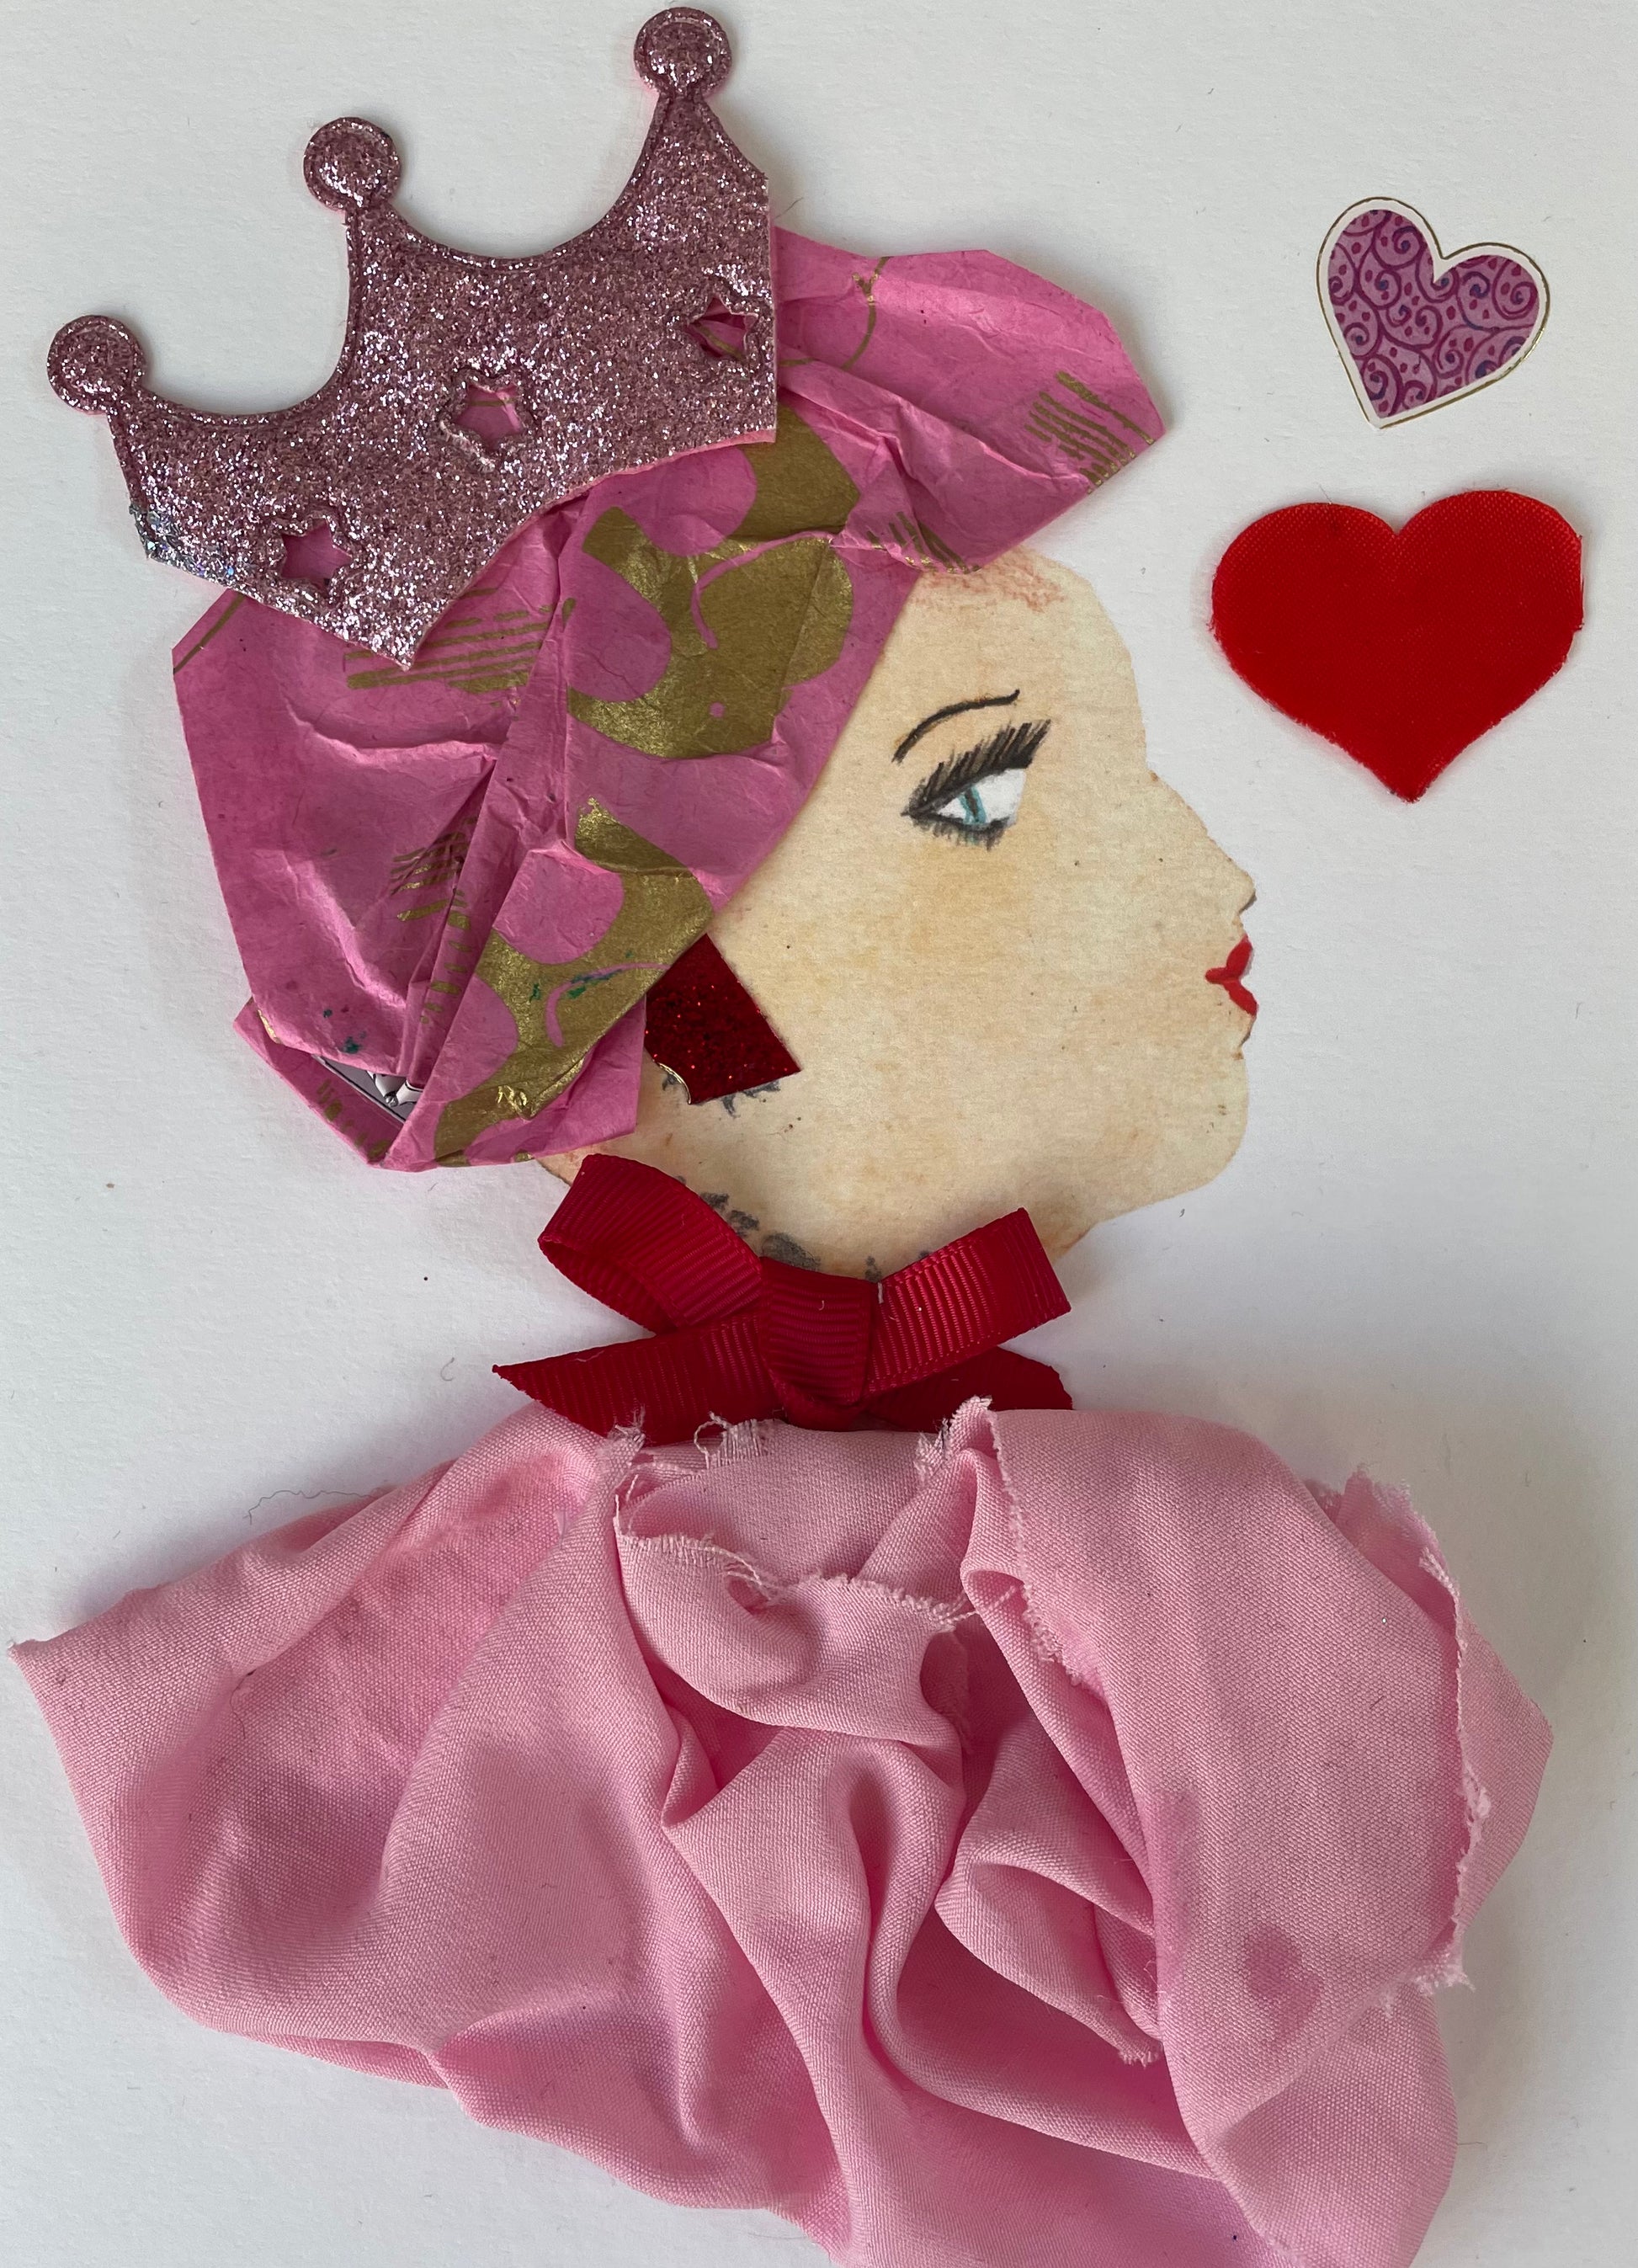 Adorning her ensemble, Lady Pretty Pink wears a light pink blouse coupled with a darker pink headpiece. The tasteful necklace is a dark red ribbon, while the crown on her headpiece boasts three glimmering pink stars. Further accessorizing is a pink heart and a red heart to her right. 